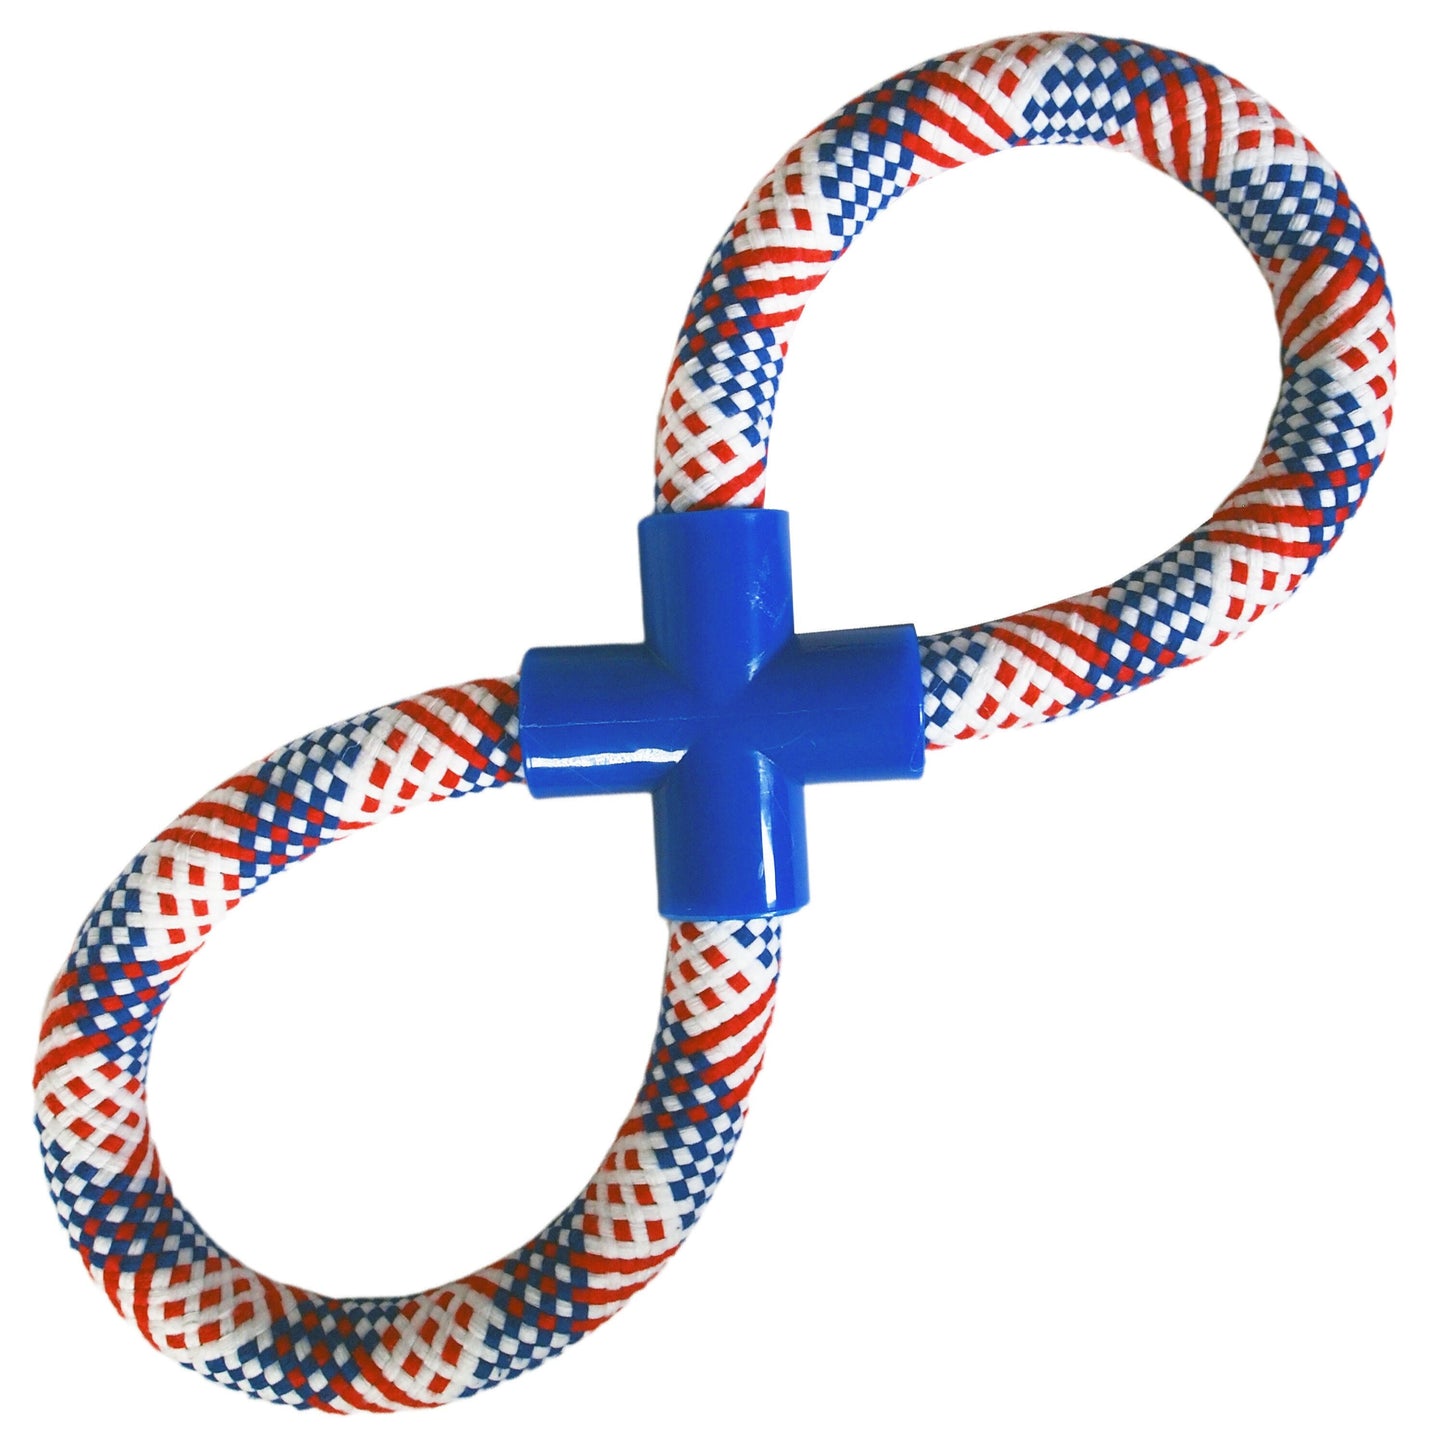 Patriotic Red White & Blue Rope Toy for Big Dogs - fetch - toss - play